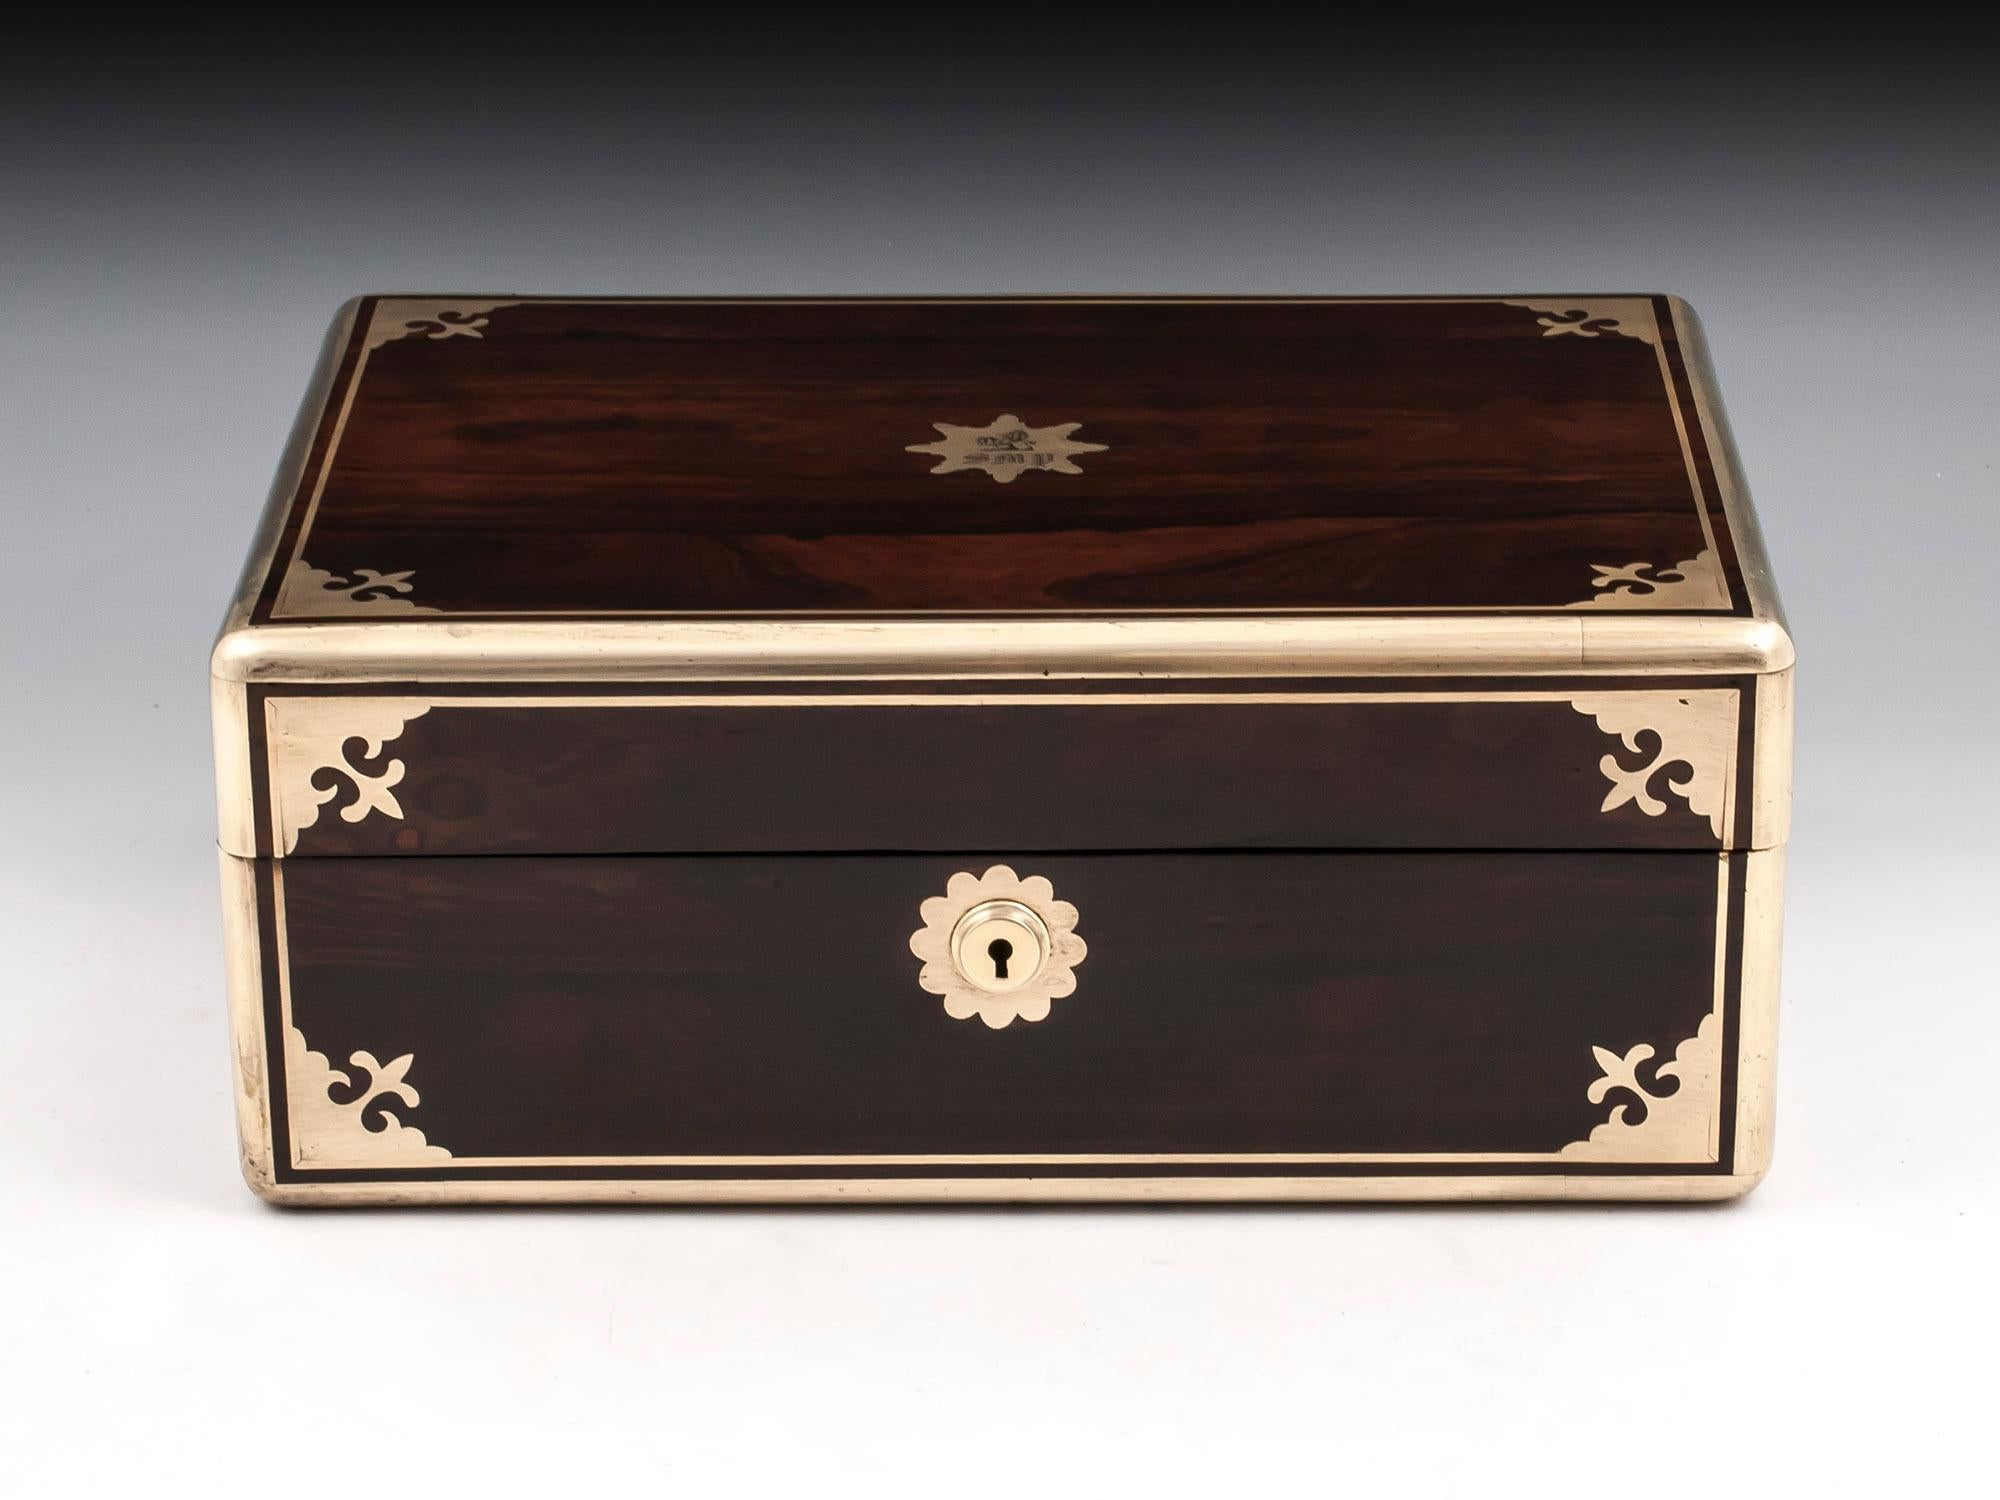 Georgian jewelry box veneered in mahogany bound in thick robust brass with brass stringing and ornate borders. The top is adorned with an engraved star shaped initial plate with a Lion and the letters 